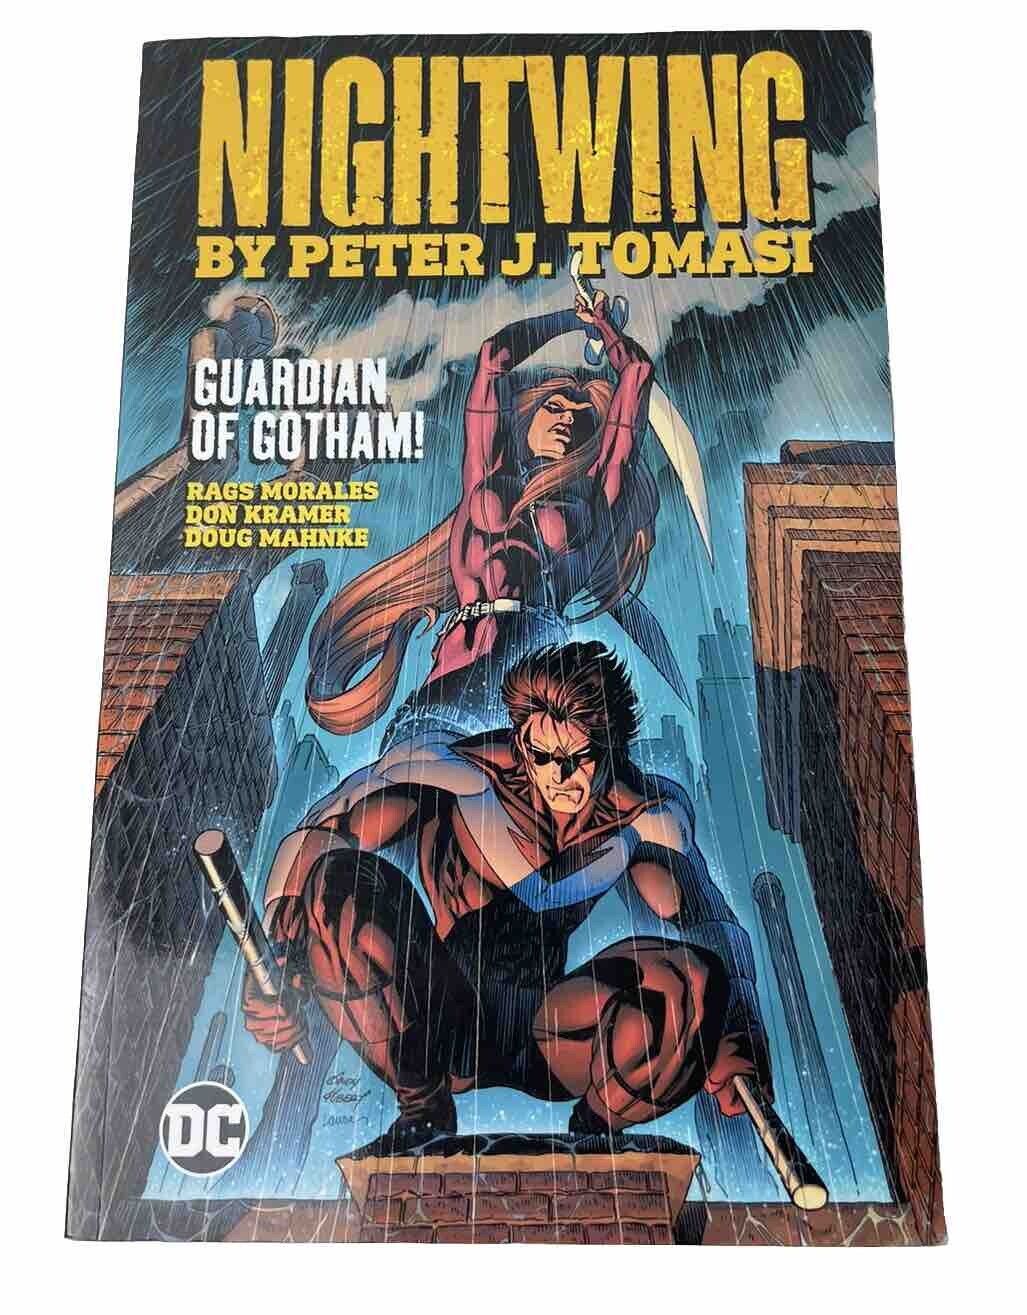 Nightwing: Guardian of Gotham by Peter J. Tomasi (DC Comics 2019 March 2020)